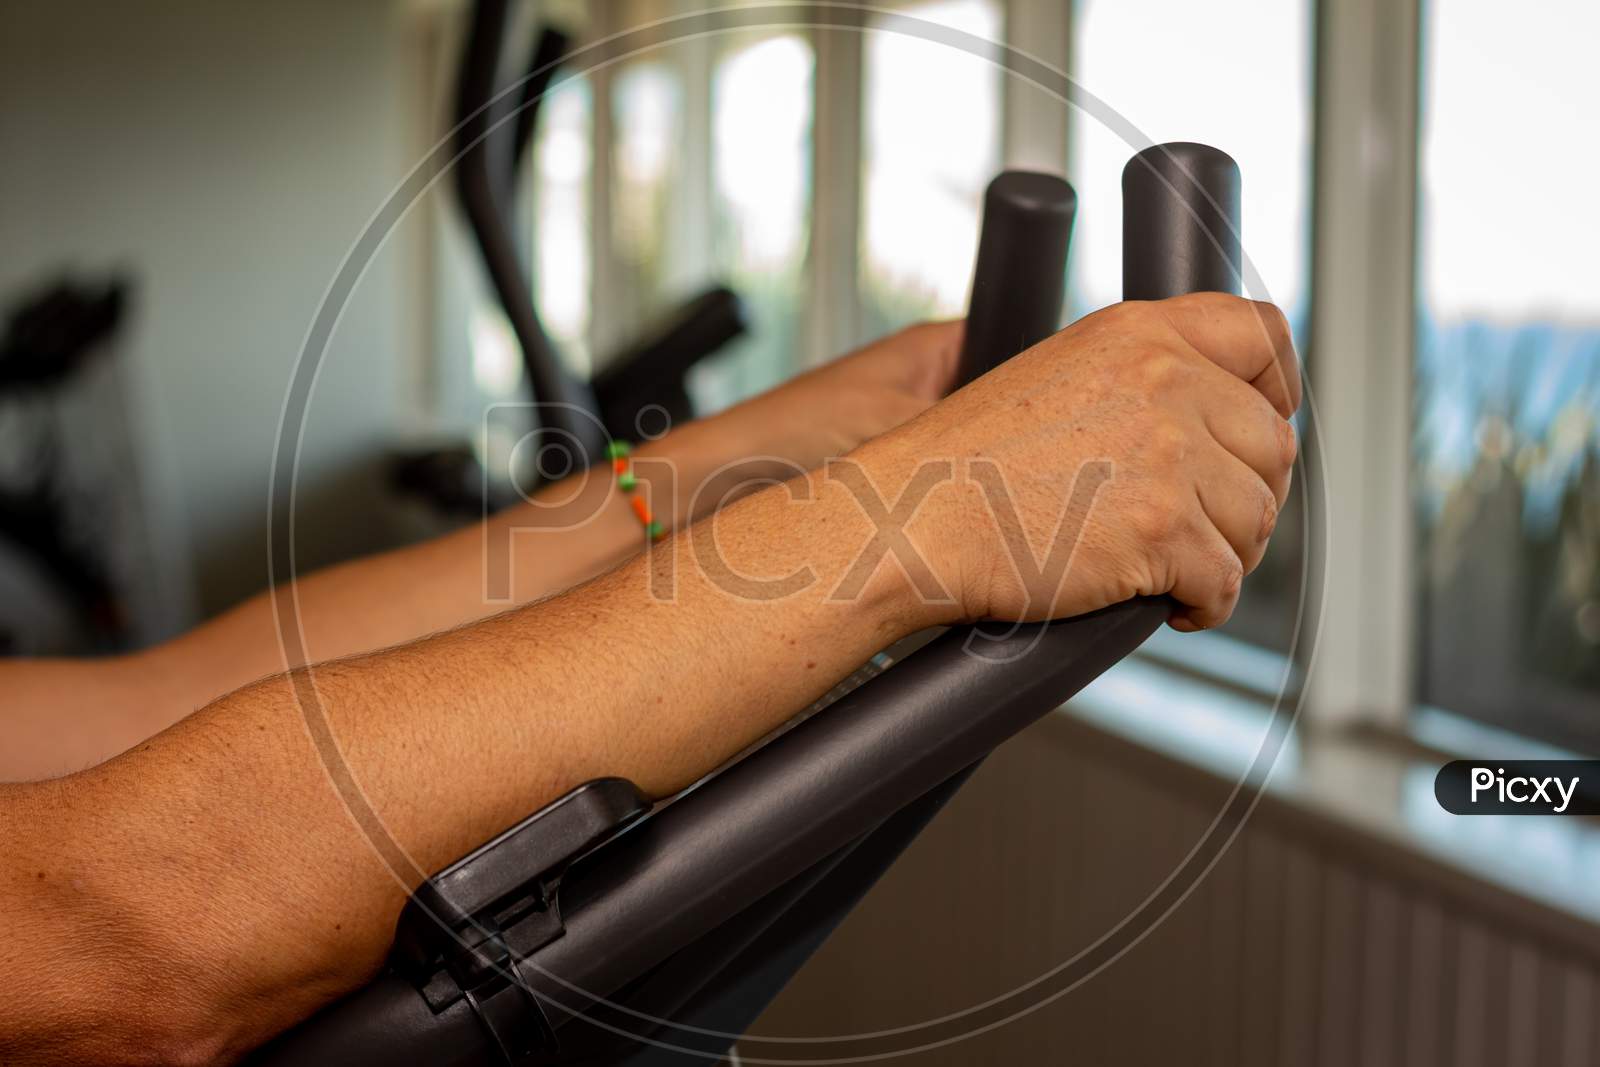 Adult Man Doing Exercise In The Gym. In Machine Doing Aerobic Exercise.